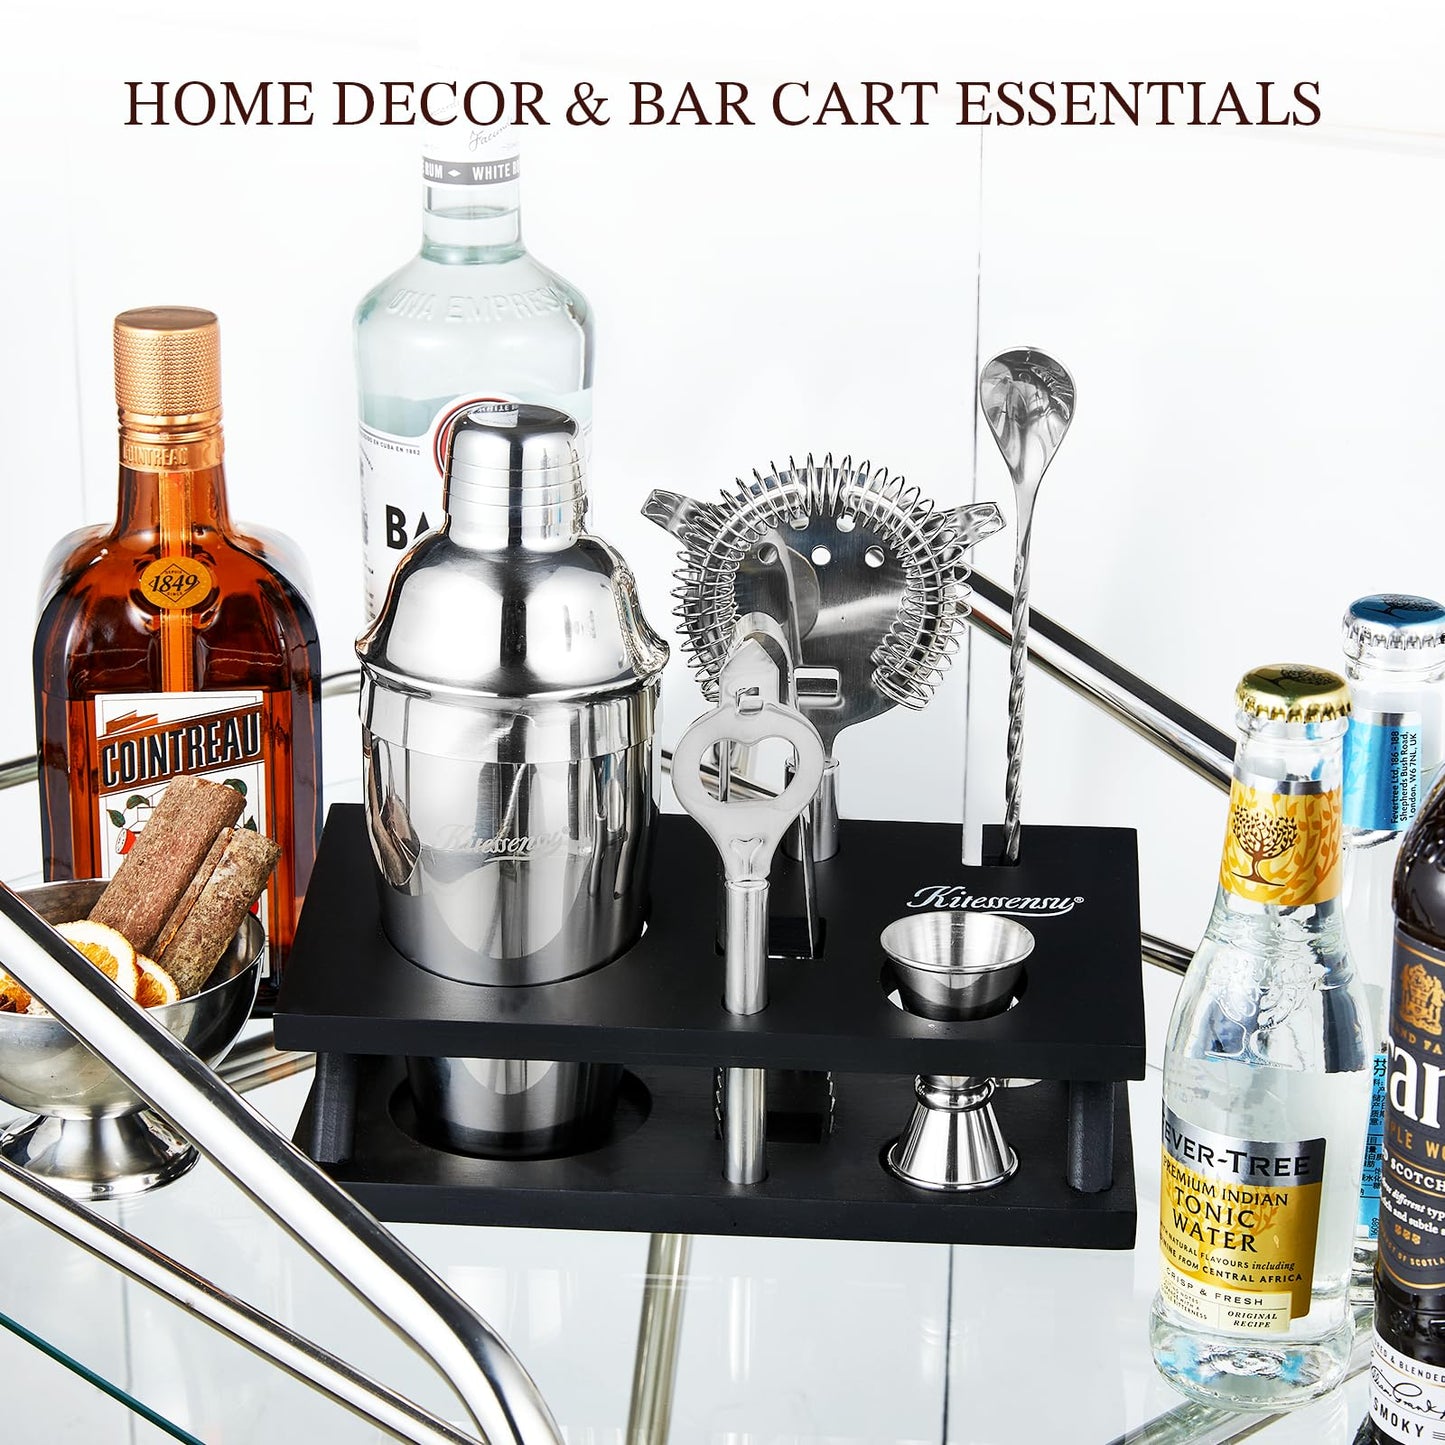 KITESSENSU Cocktail Shaker Set Bartender Kit, 6-Piece Silver Bar Set with Stand, Bar kit with Essential Bar Accessory Tools: Martini Shaker, Jigger, Strainer, Bar Spoon, Tongs, Opener